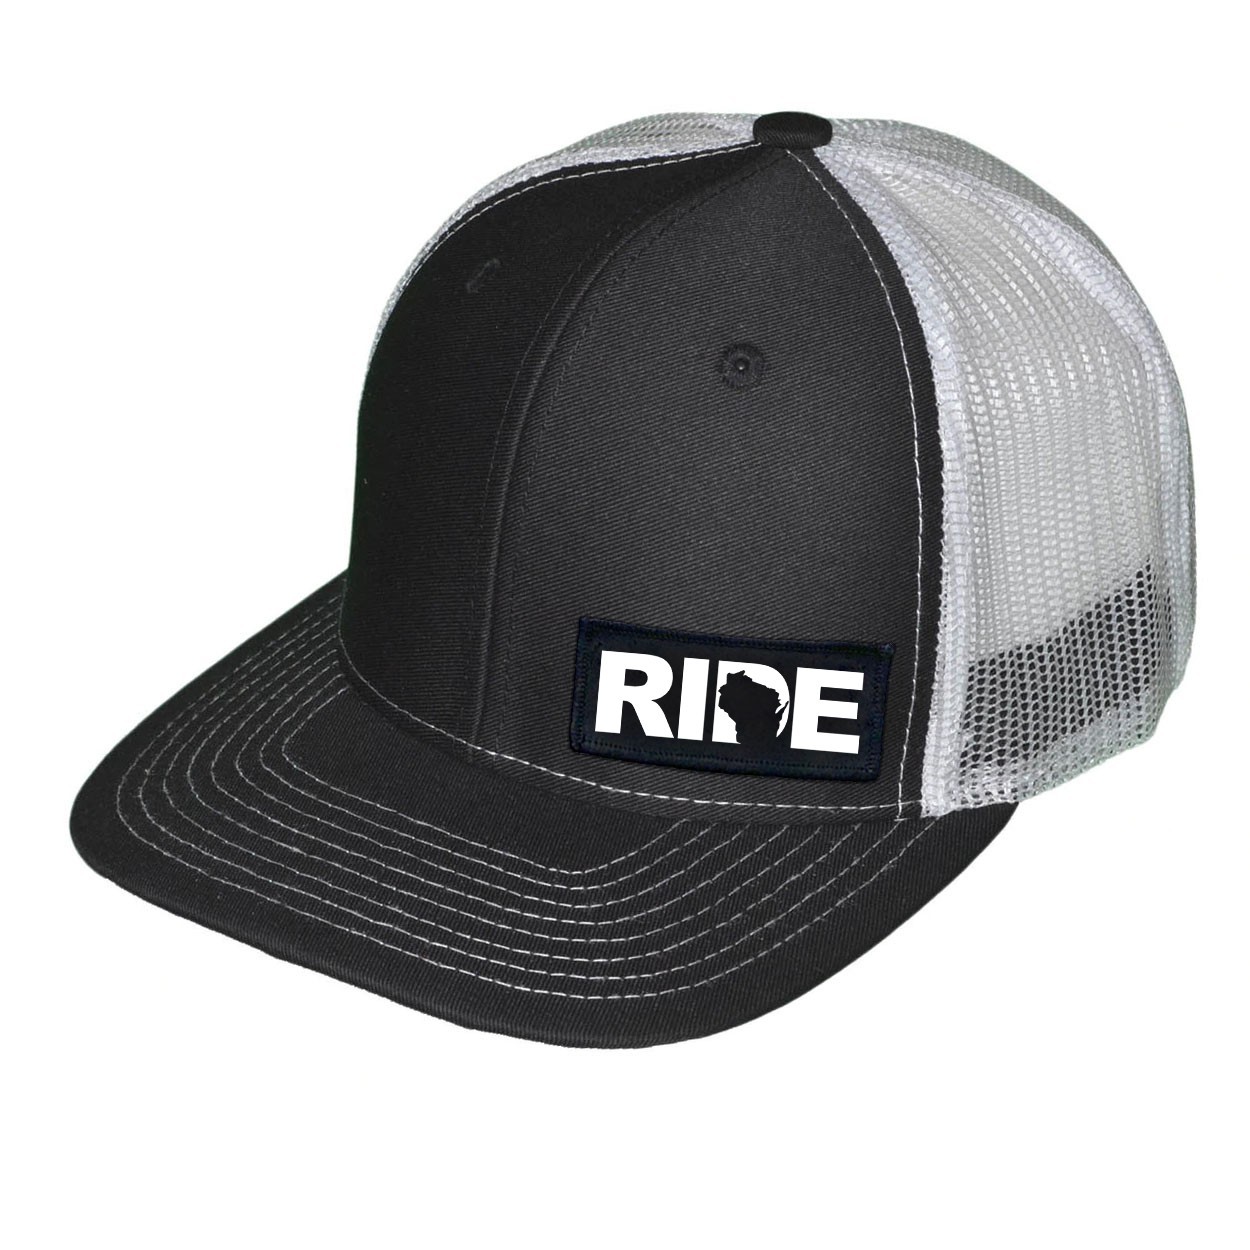 Ride Wisconsin Night Out Woven Patch Snapback Trucker Hat Black/White (White Logo)